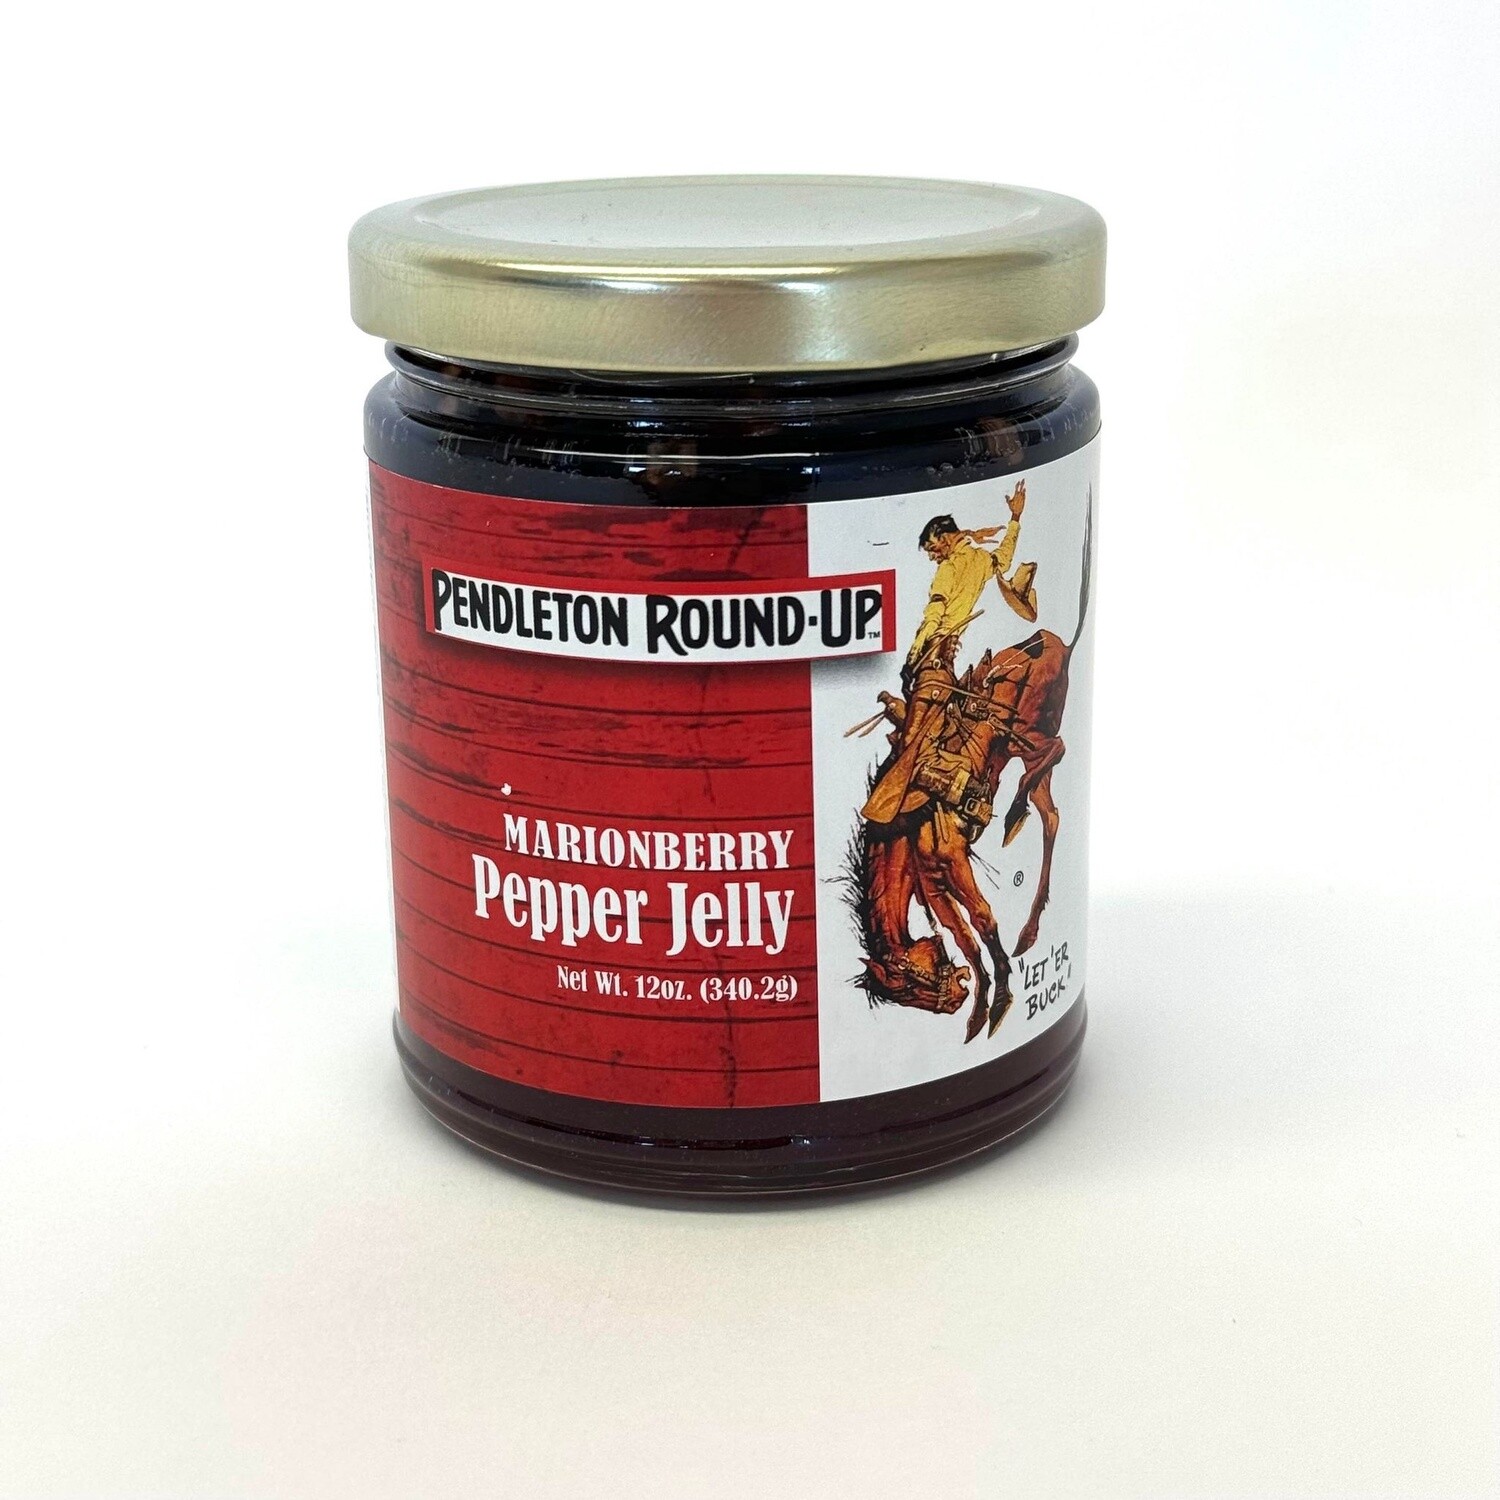 Pendleton Round-Up Marionberry Pepper Jelly, size: 12oz